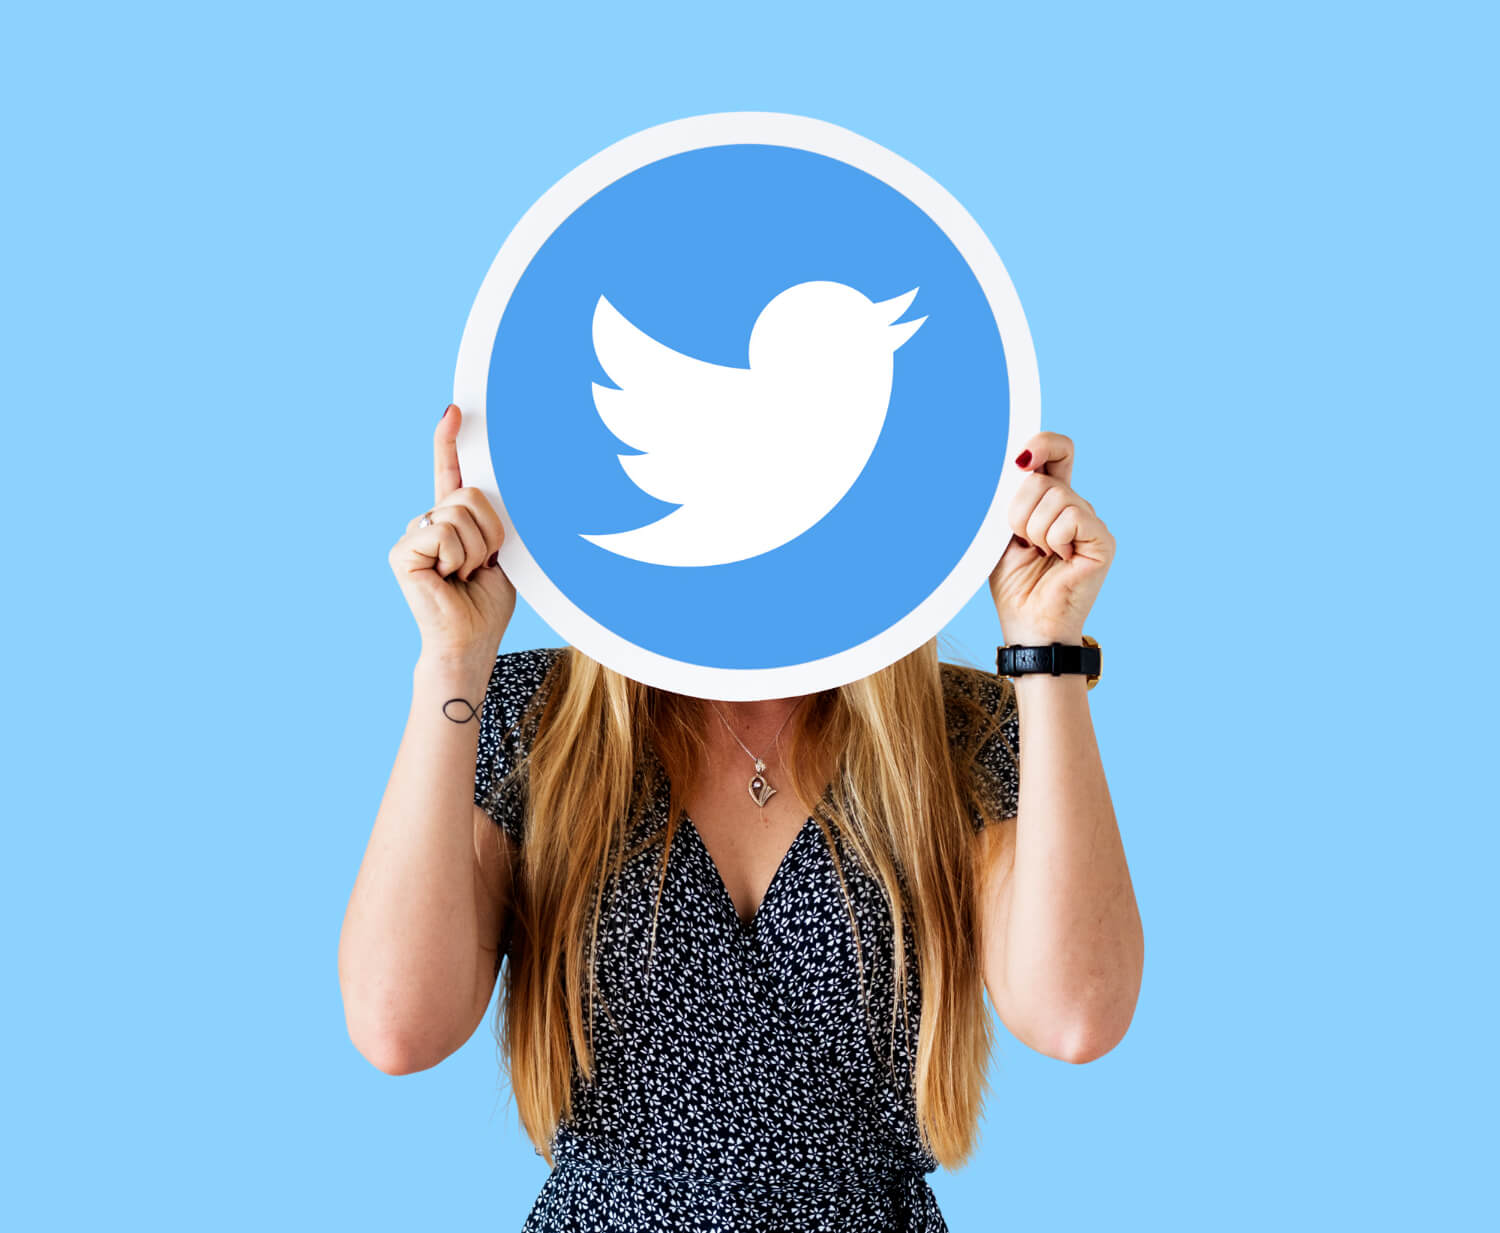 A lady holding a twitter sign